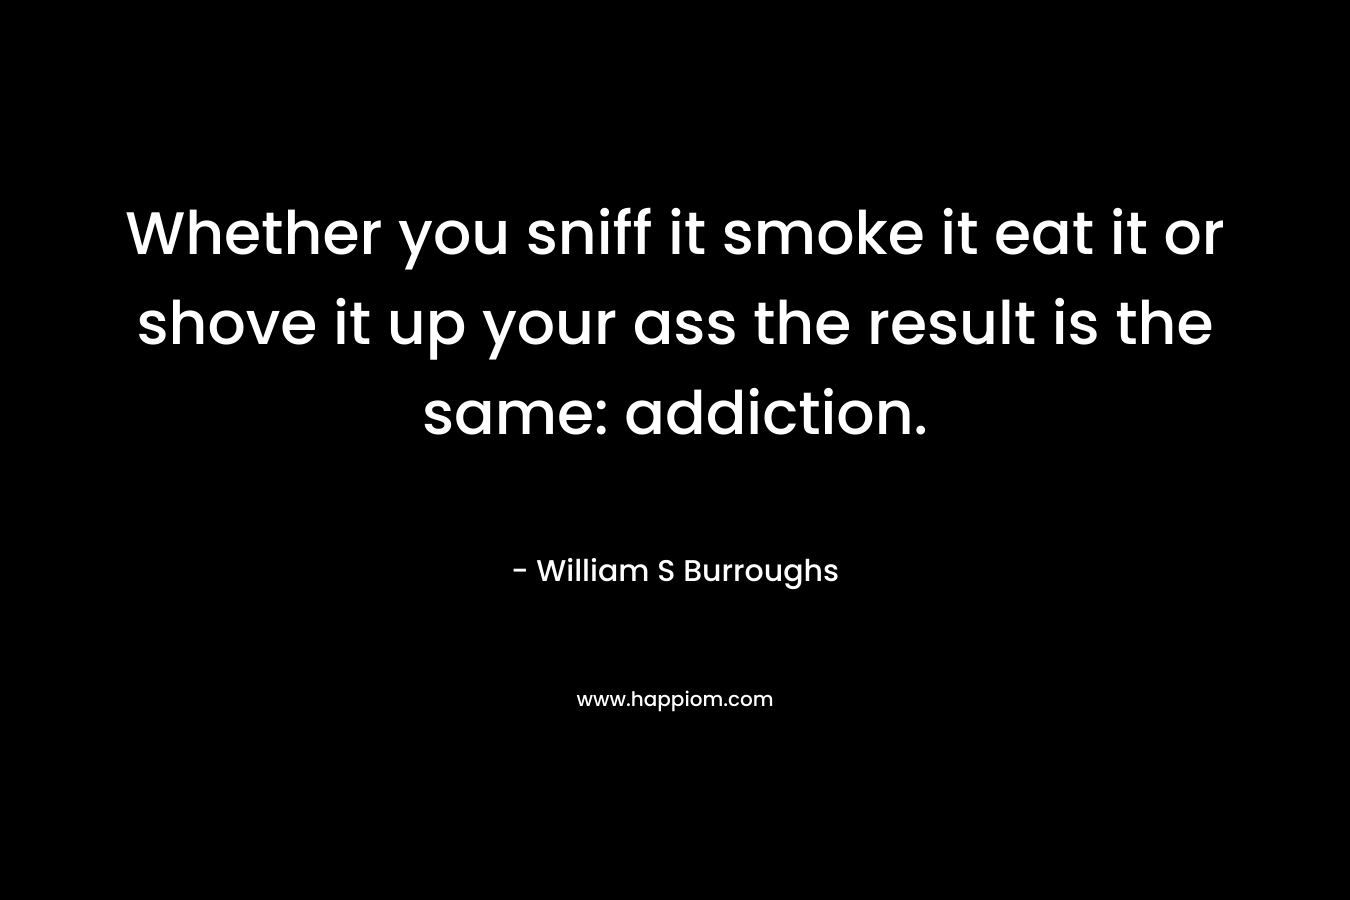 Whether you sniff it smoke it eat it or shove it up your ass the result is the same: addiction. – William S Burroughs